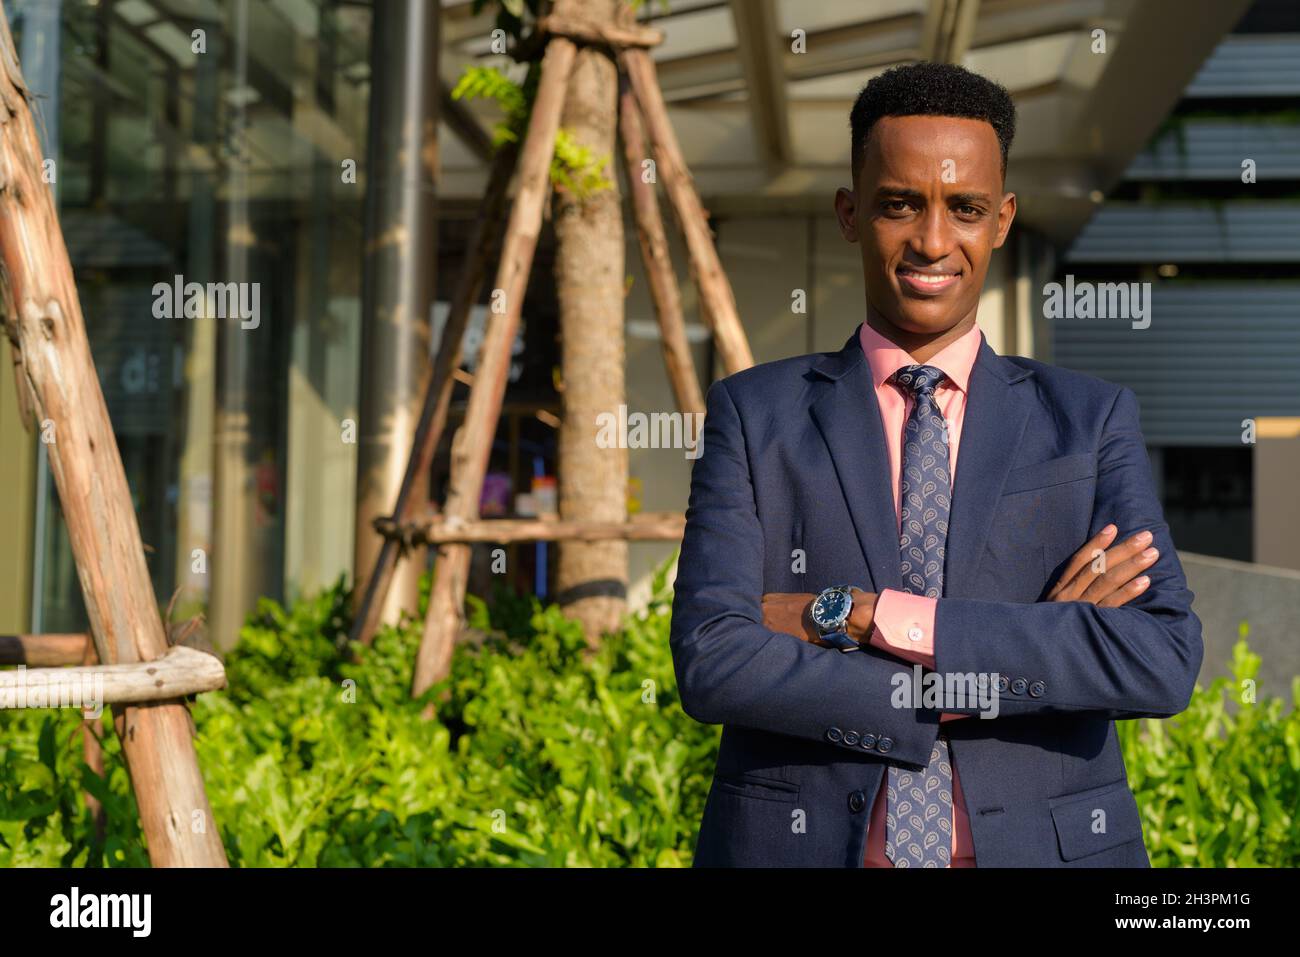 Portrait of young African businessman wearing suit and tie Stock Photo